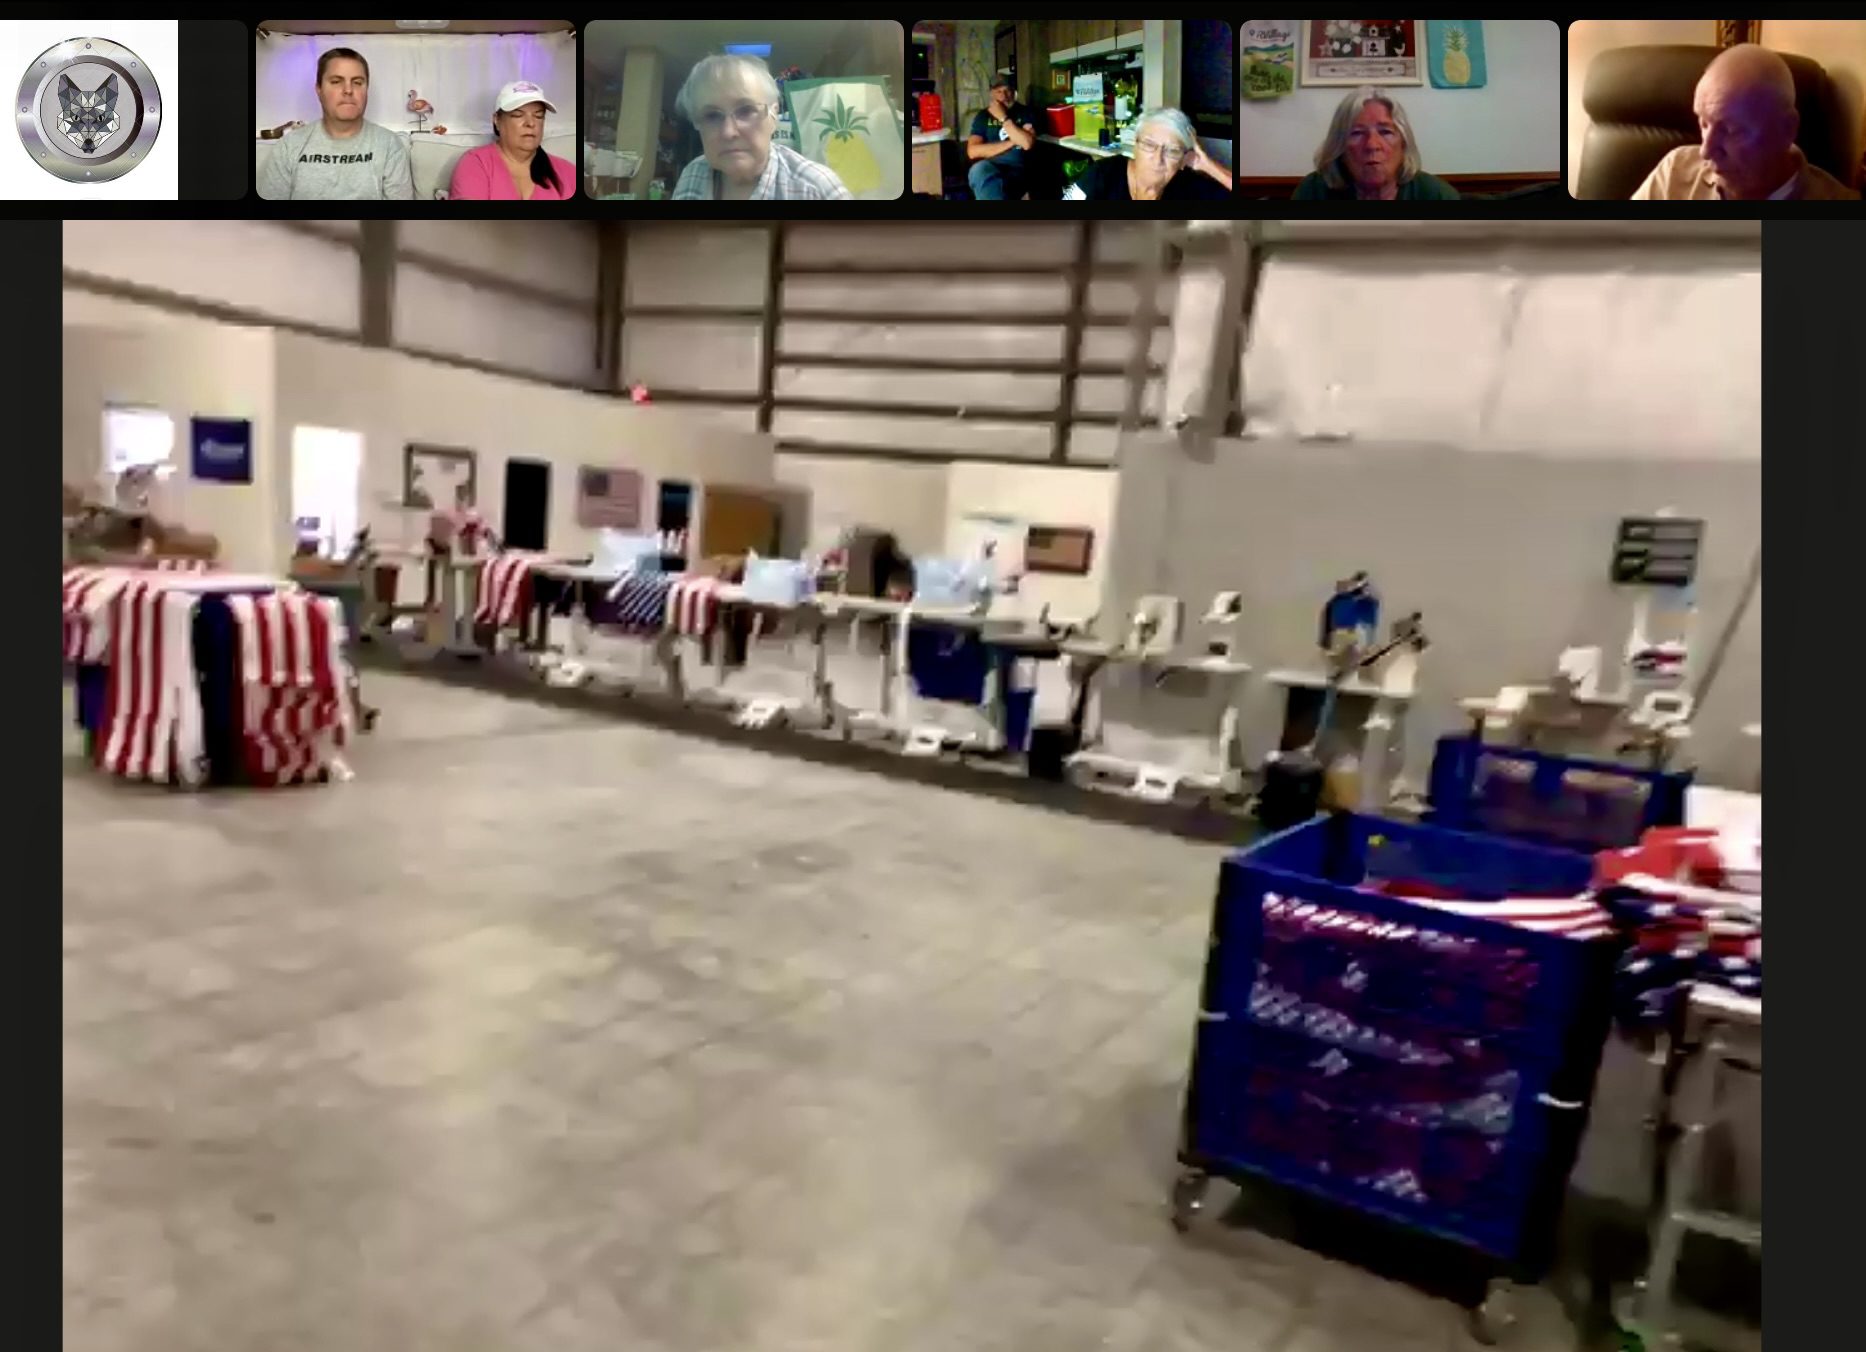 Online Zoom tour of Allegiance Flag Company - flags made in USA